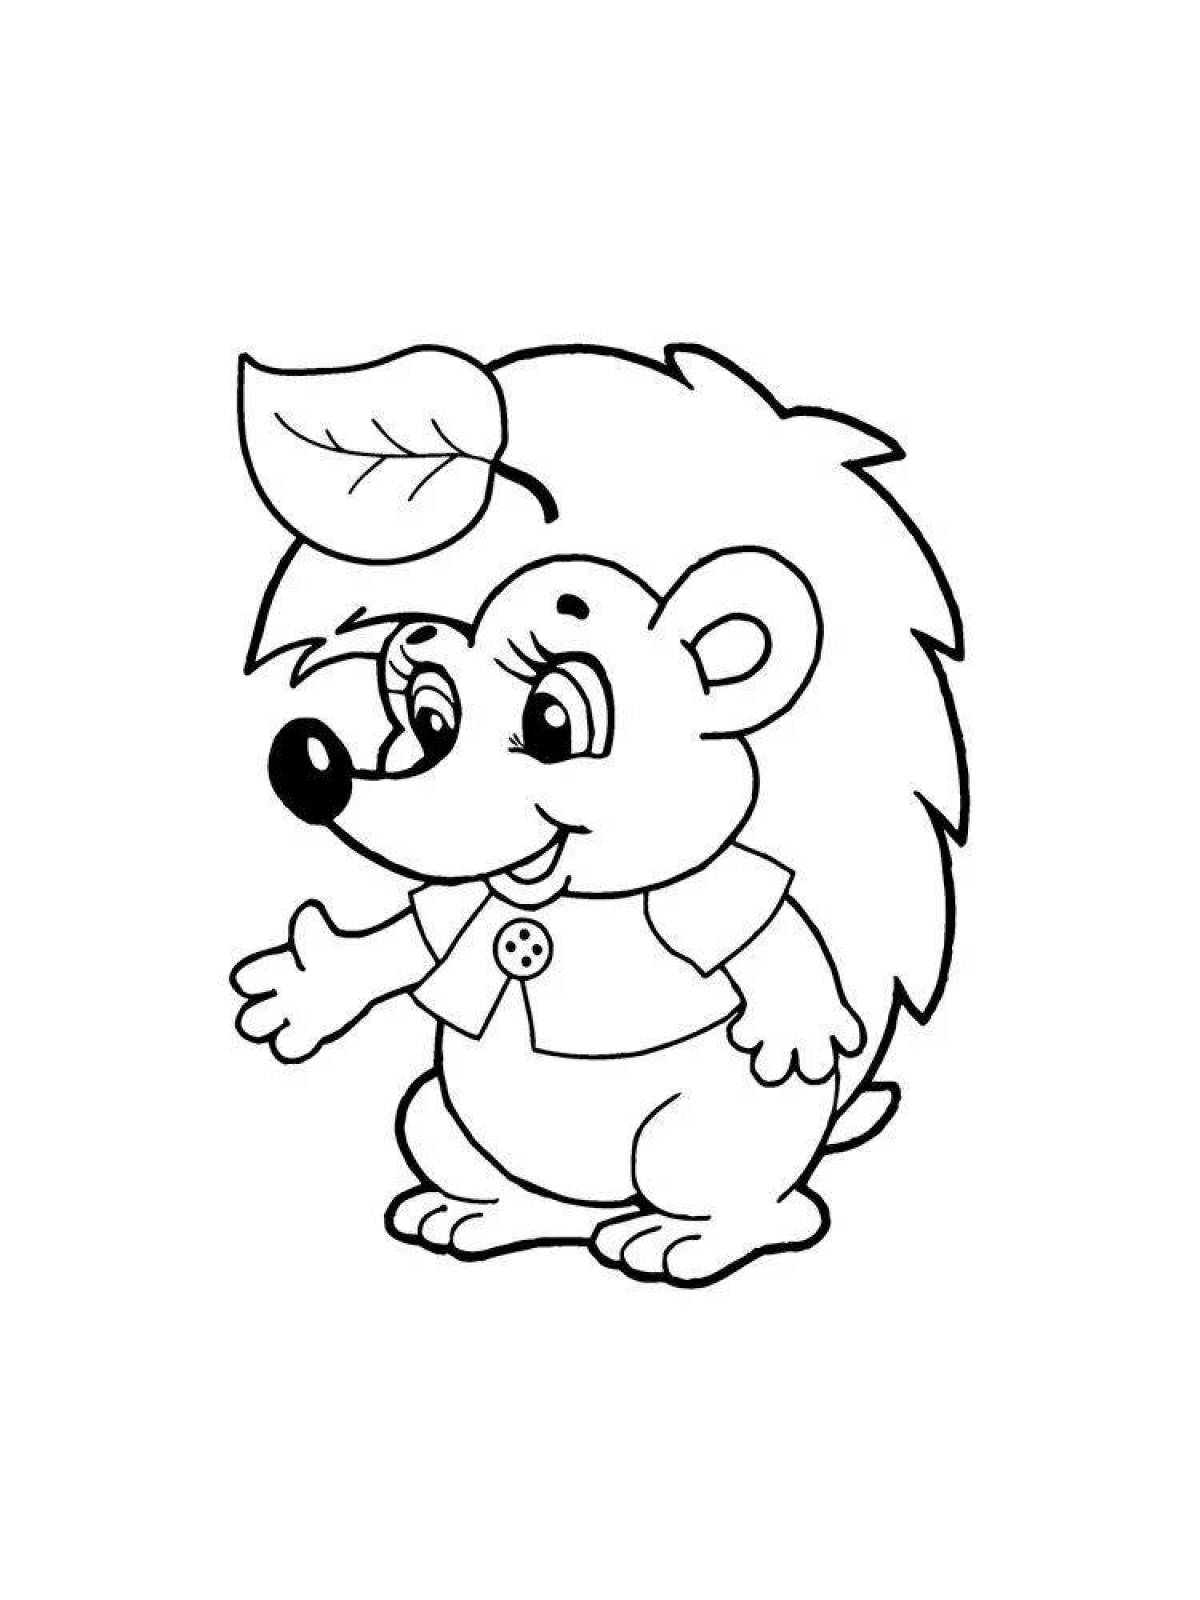 Coloring page quirky cute hedgehog